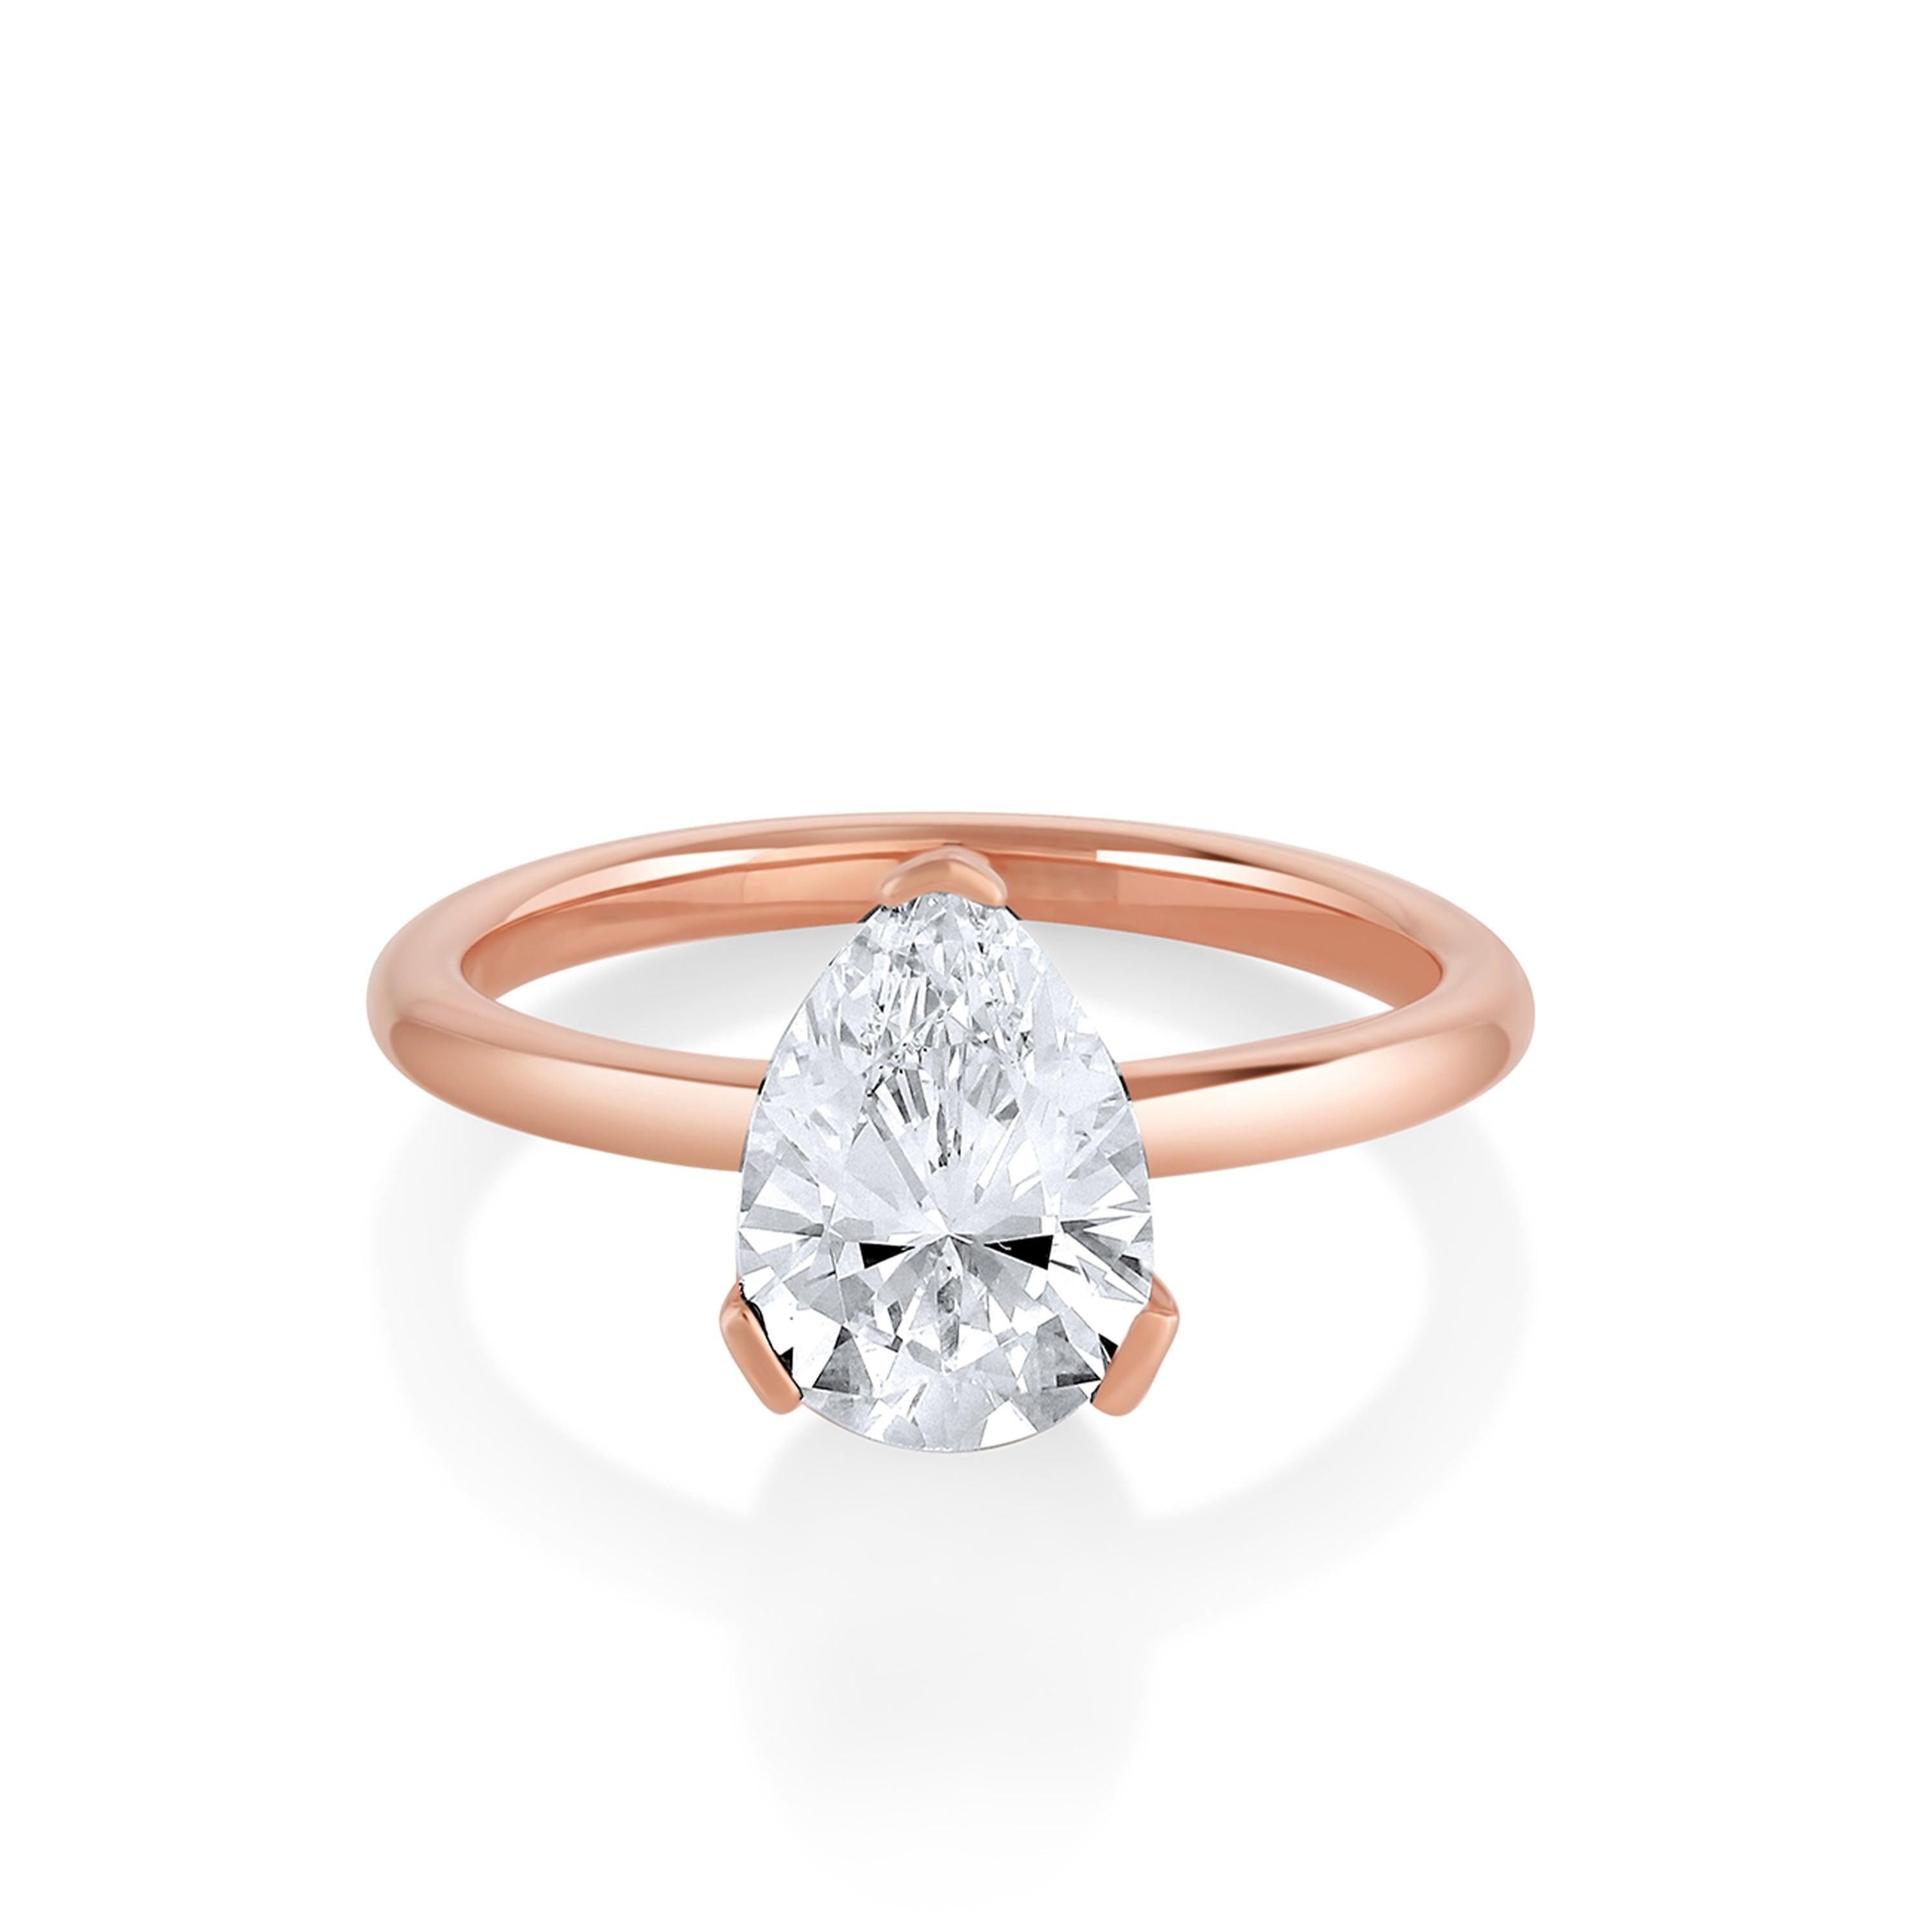 Marrow Fine Jewelry Sloane White Diamond Pear Solitaire Engagement Ring